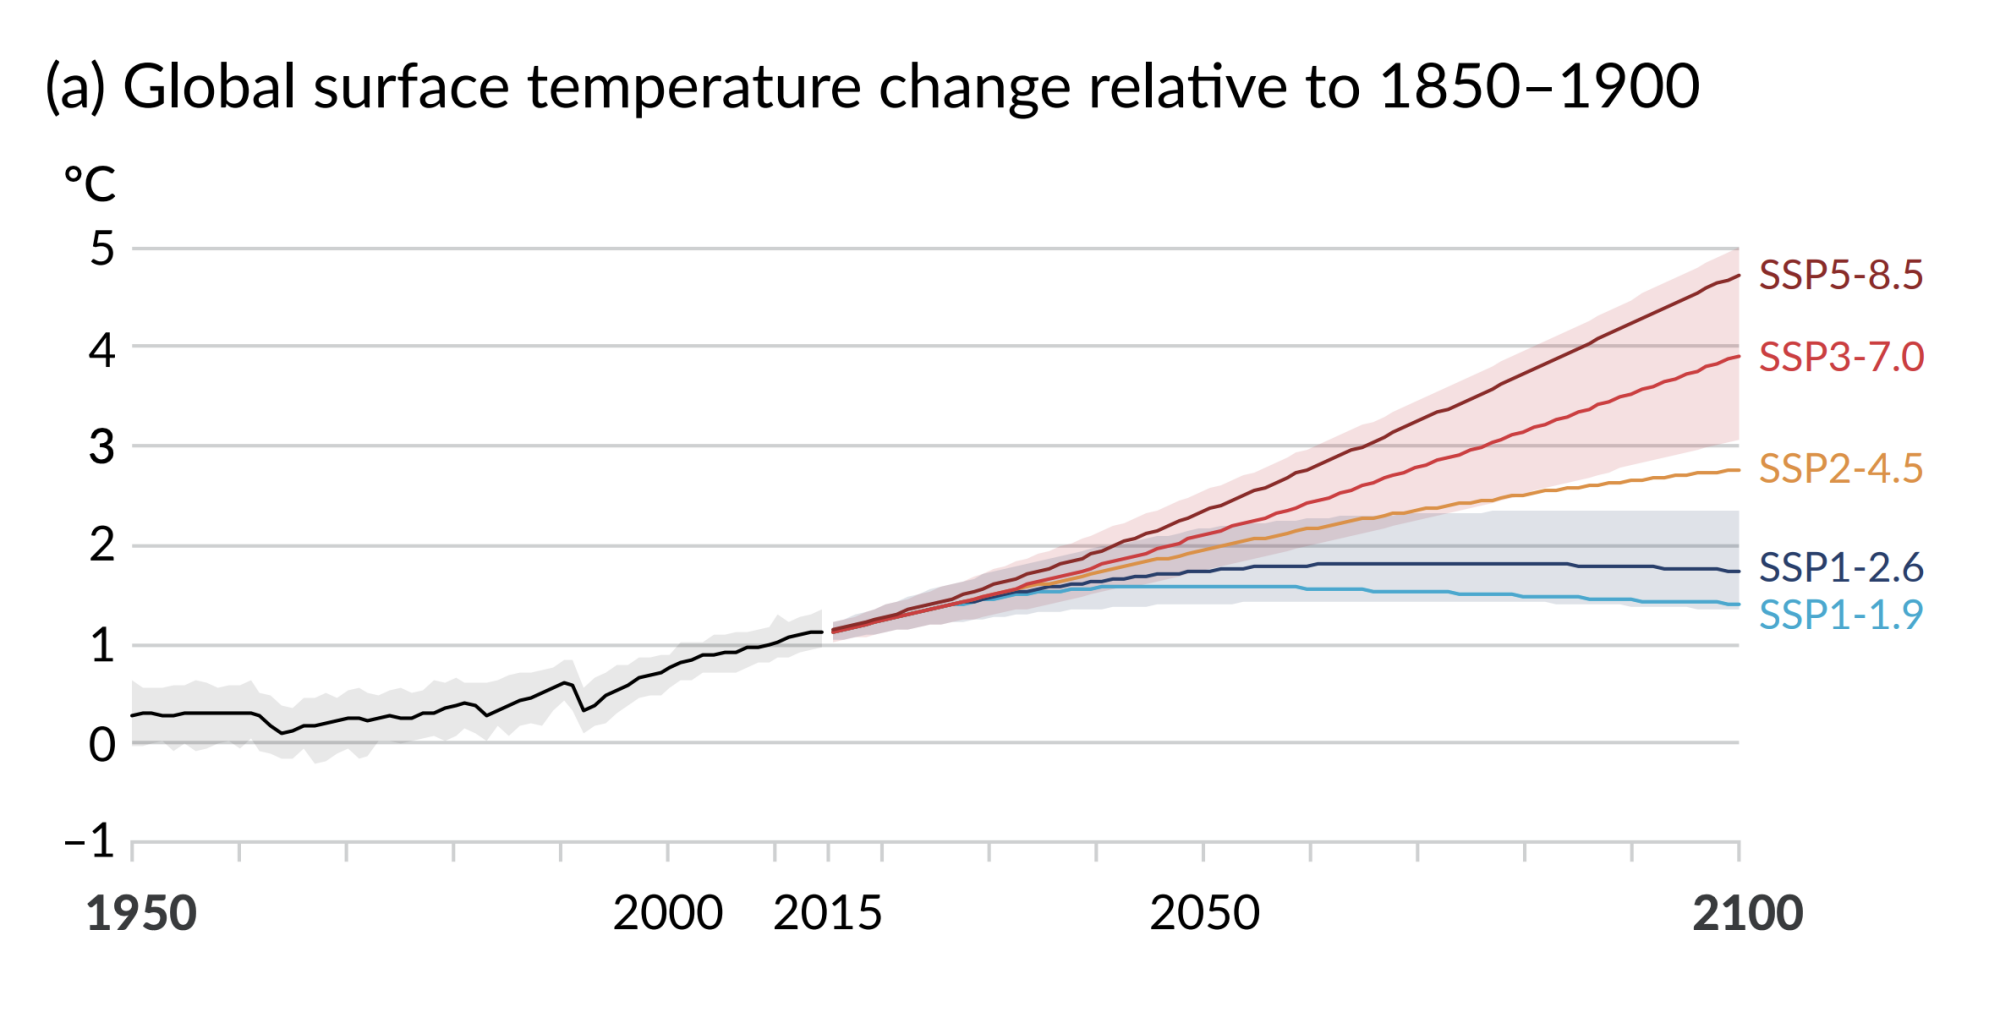 The different future warming scenarios, largely based on carbon emissions. It's more likely we're headed towards a middle-ground scenario, similar to the orange line, "SSP2-4.5."